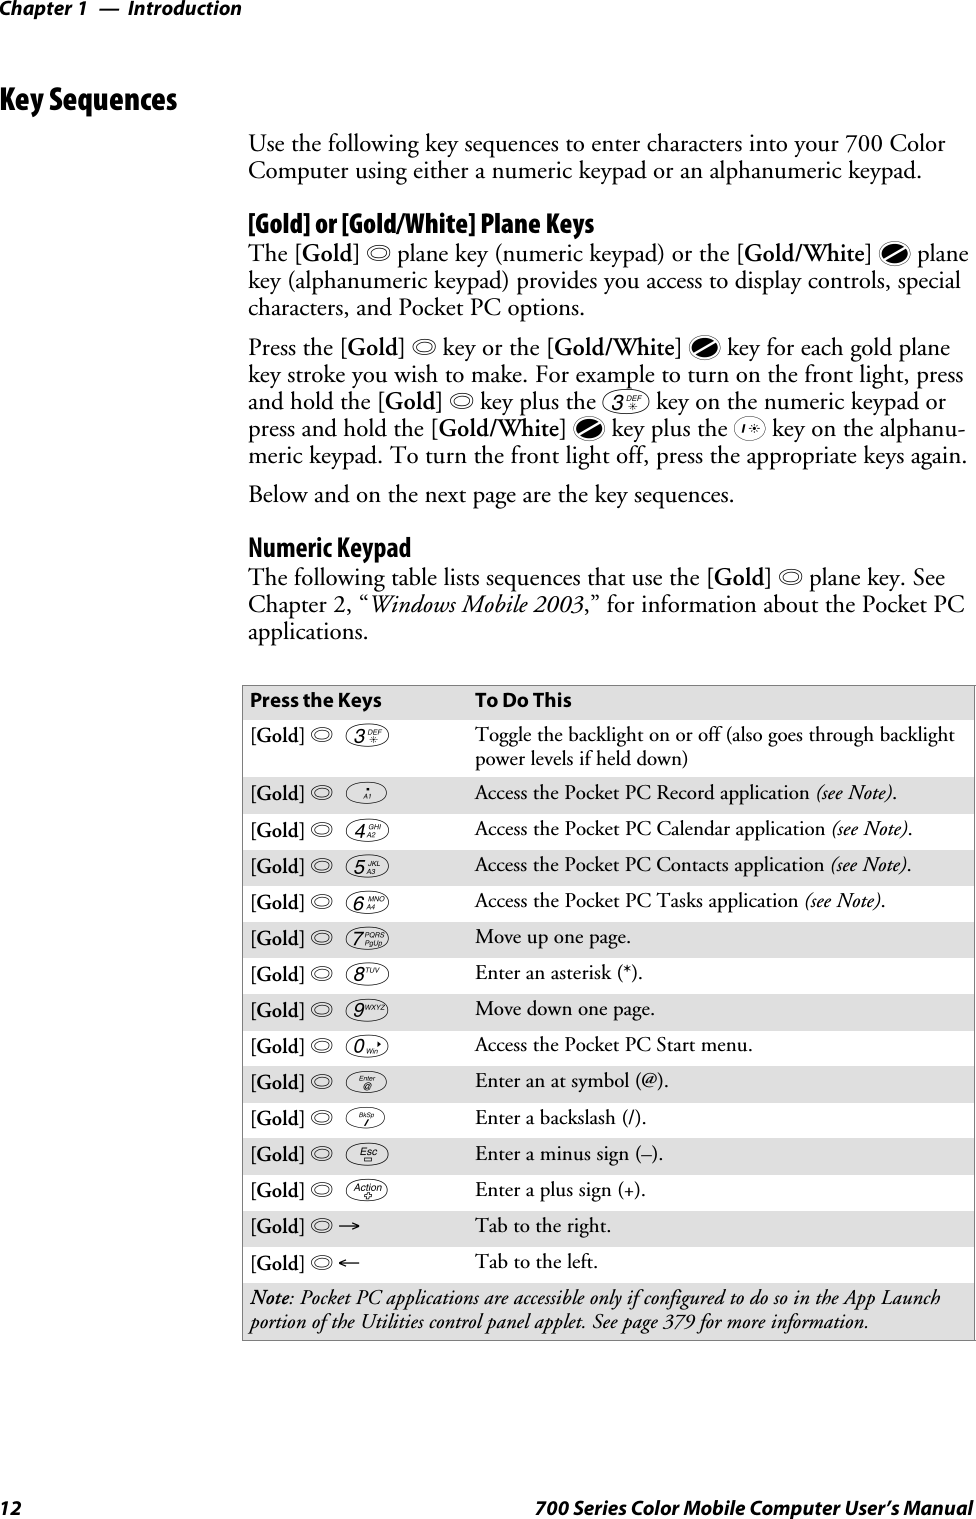 IntroductionChapter —112 700 Series Color Mobile Computer User’s ManualKey SequencesUse the following key sequences to enter characters into your 700 ColorComputer using either a numeric keypad or an alphanumeric keypad.[Gold] or [Gold/White] Plane KeysThe [Gold] bplane key (numeric keypad) or the [Gold/White] cplanekey (alphanumeric keypad) provides you access to display controls, specialcharacters, and Pocket PC options.Press the [Gold] bkey or the [Gold/White] ckey for each gold planekey stroke you wish to make. For example to turn on the front light, pressandholdthe[Gold] bkey plus the 3key on the numeric keypad orpress and hold the [Gold/White] ckey plus the Ikey on the alphanu-meric keypad. To turn the front light off, press the appropriate keys again.Below and on the next page are the key sequences.Numeric KeypadThe following table lists sequences that use the [Gold] bplane key. SeeChapter 2, “Windows Mobile 2003,” for information about the Pocket PCapplications.Press the Keys To Do This[Gold] b3 Toggle the backlight on or off (also goes through backlightpower levels if held down)[Gold] ba Access the Pocket PC Record application (see Note).[Gold] b4 Access the Pocket PC Calendar application (see Note).[Gold] b5 Access the Pocket PC Contacts application (see Note).[Gold] b6 Access the Pocket PC Tasks application (see Note).[Gold] b7 Move up one page.[Gold] b8 Enter an asterisk (*).[Gold] b9 Move down one page.[Gold] b0 Access the Pocket PC Start menu.[Gold] be Enter an at symbol (@).[Gold] bK Enter a backslash (/).[Gold] bE Enter a minus sign (–).[Gold] bA Enter a plus sign (+).[Gold] b→Tab to the right.[Gold] b←Tab to the left.Note: Pocket PC applications are accessible only if configured to do so in the App Launchportion of the Utilities control panel applet. See page 379 for more information.